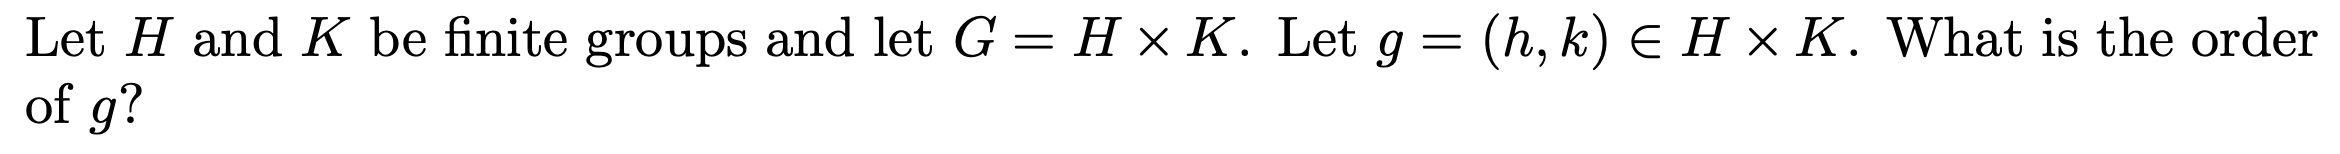 (h, k) E H x K. What is the order
Let H and K be finite groups and let G = H x K. Let g
of g?
